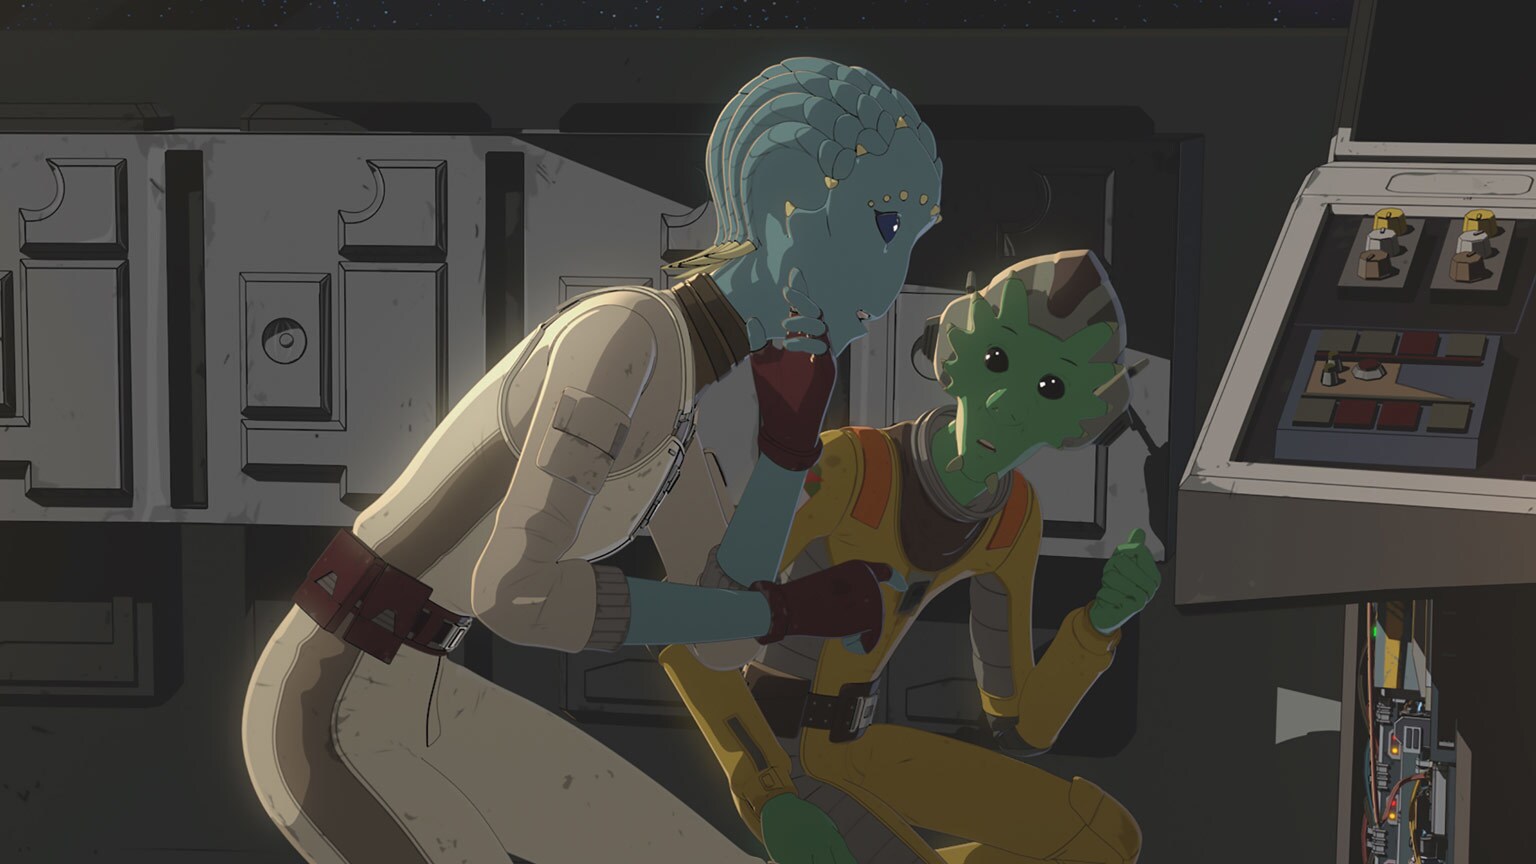 Bucket's List Extra: 5 Fun Facts from “The Engineer” - Star Wars Resistance